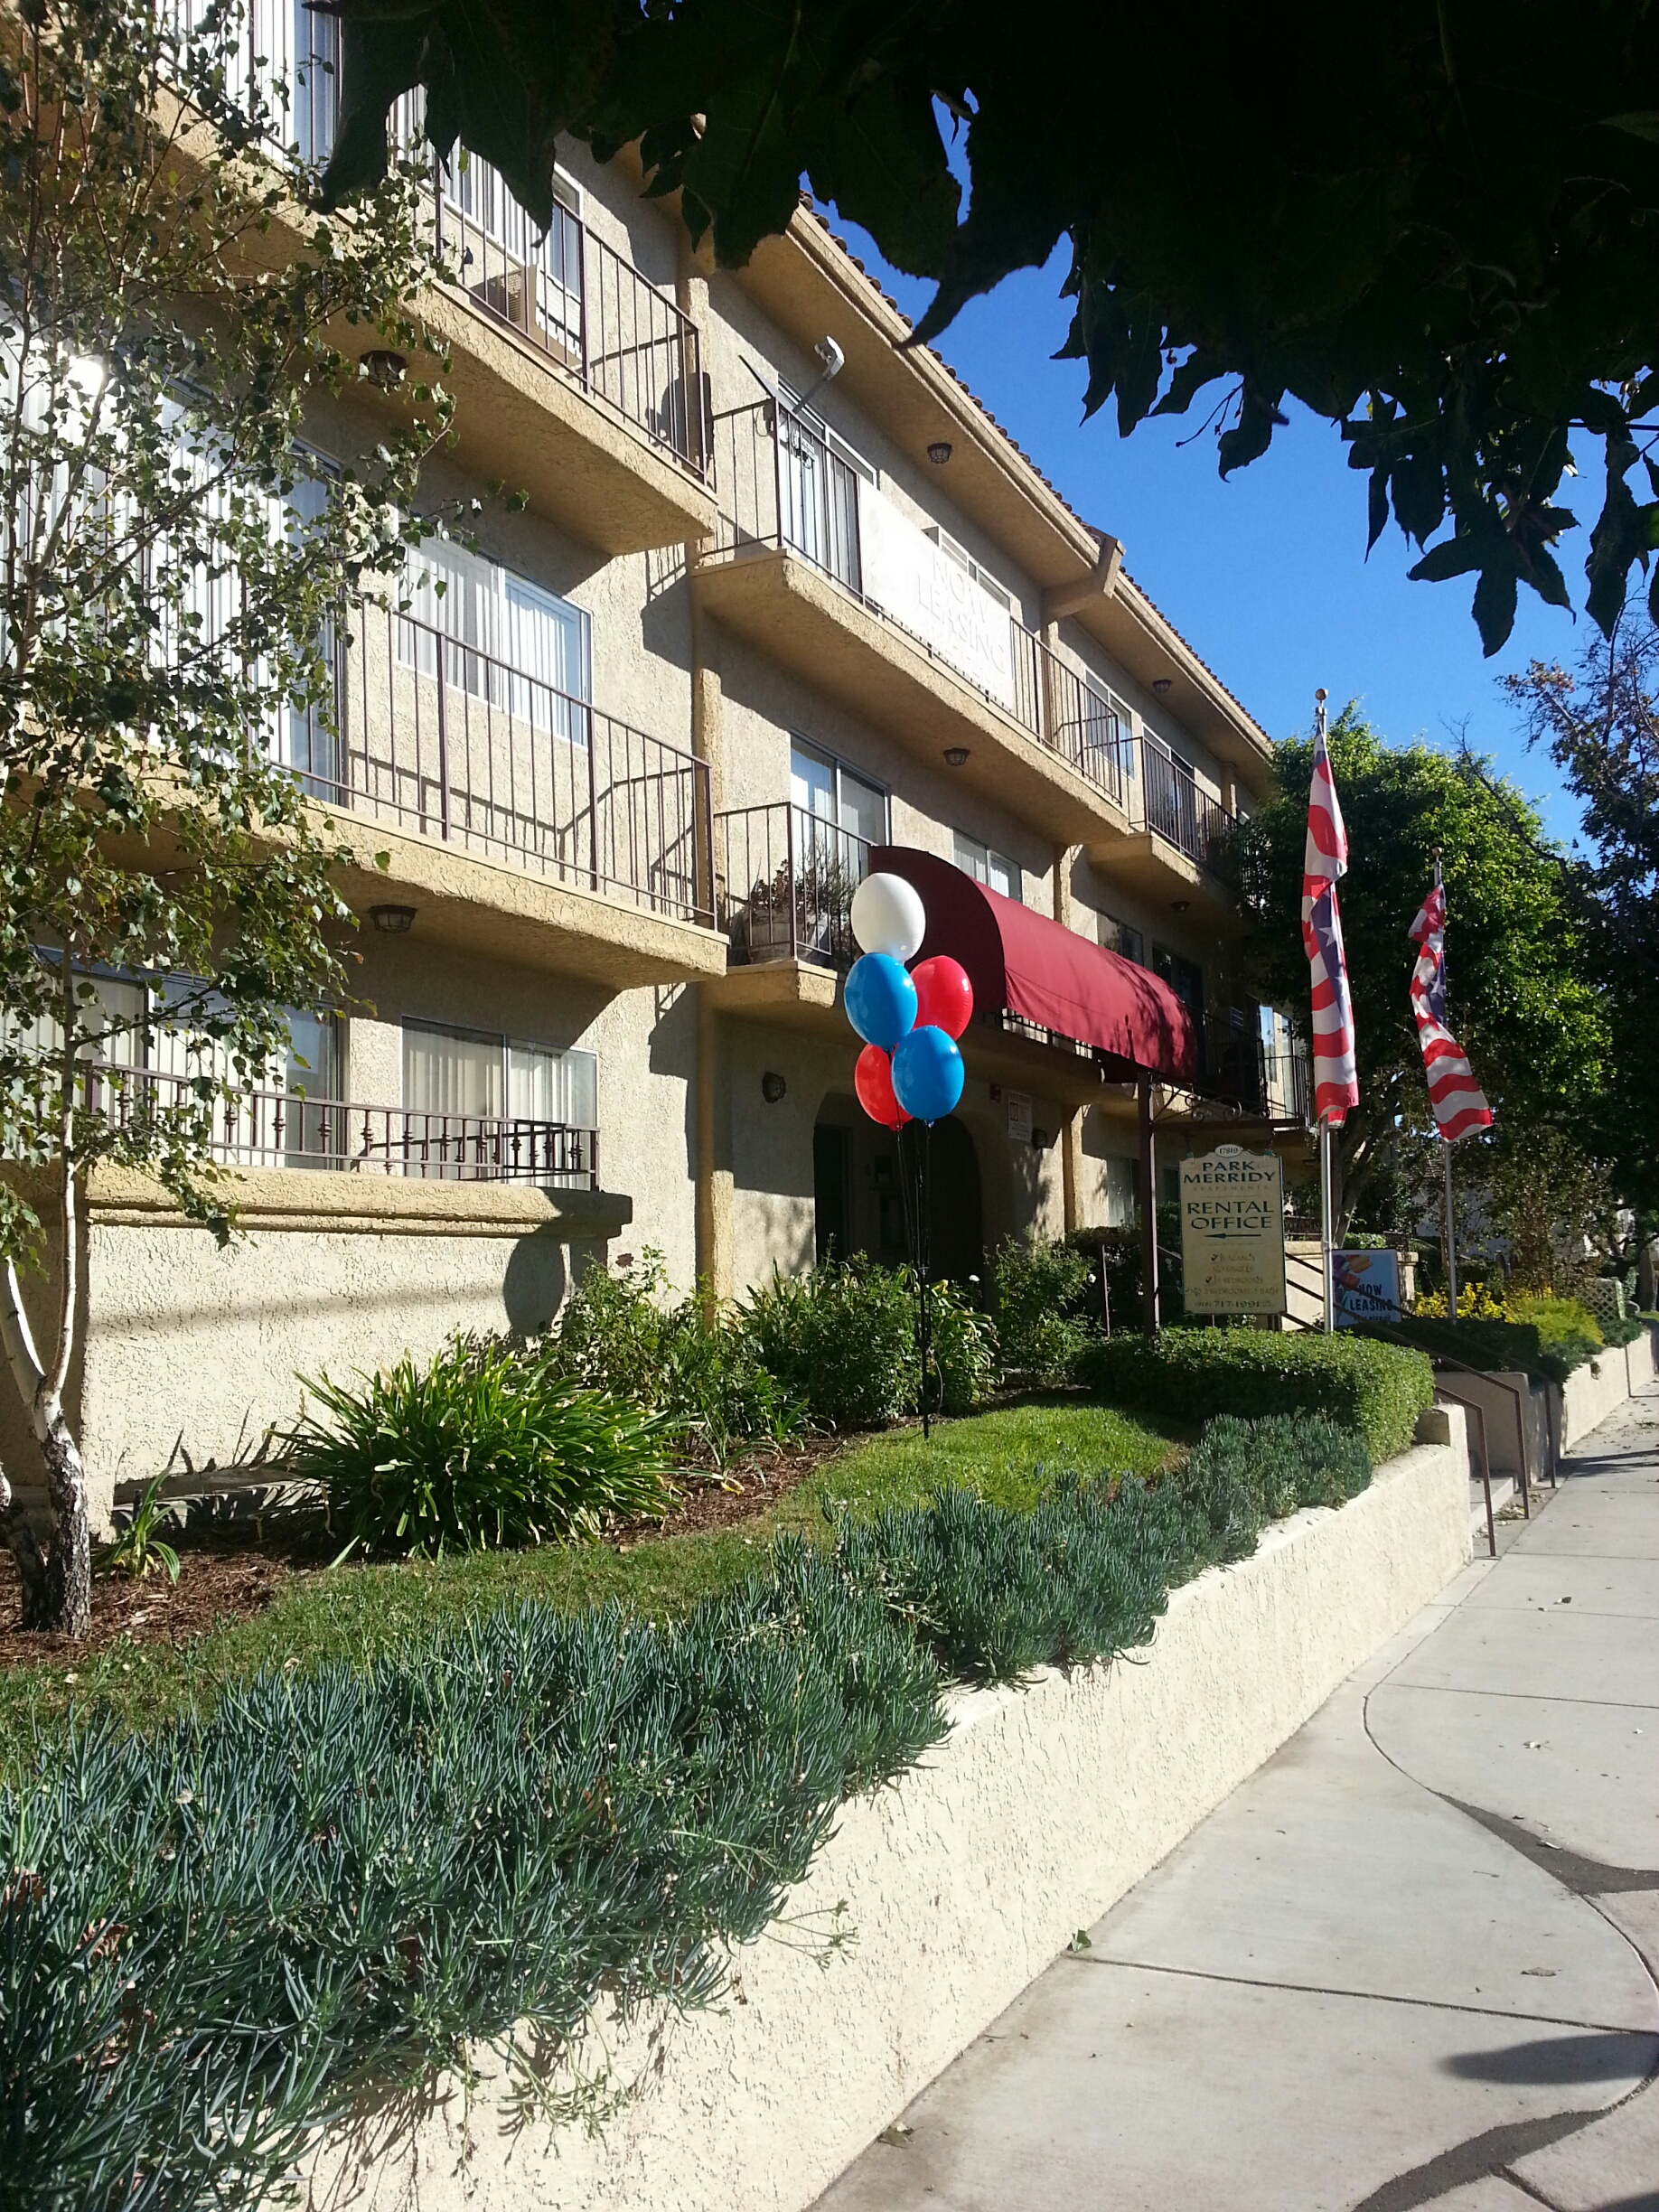 three story light yellow building, burgundy canopy right at the entrance with steps and black steel handrails, blue,white and red ballons by entrance, two USA flags on each side of the handrail, trees and landscaping, Rental and building sign